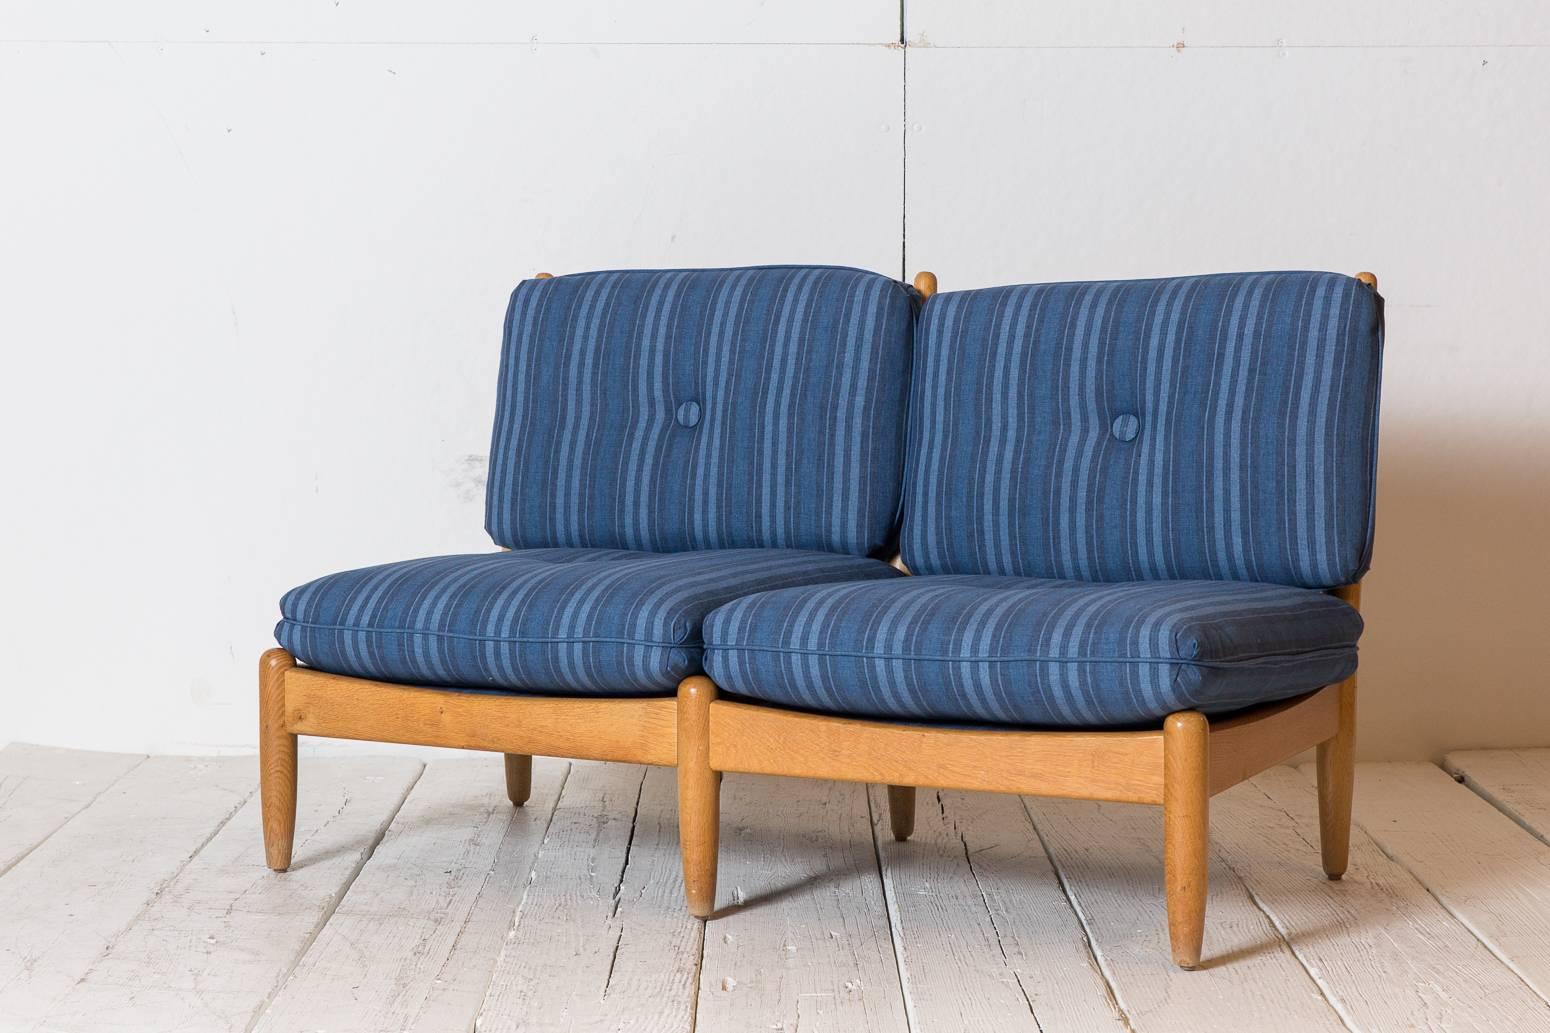 Midcentury Danish armless settee with six legs, cushions newly upholstered in blue striped fabric with button details.